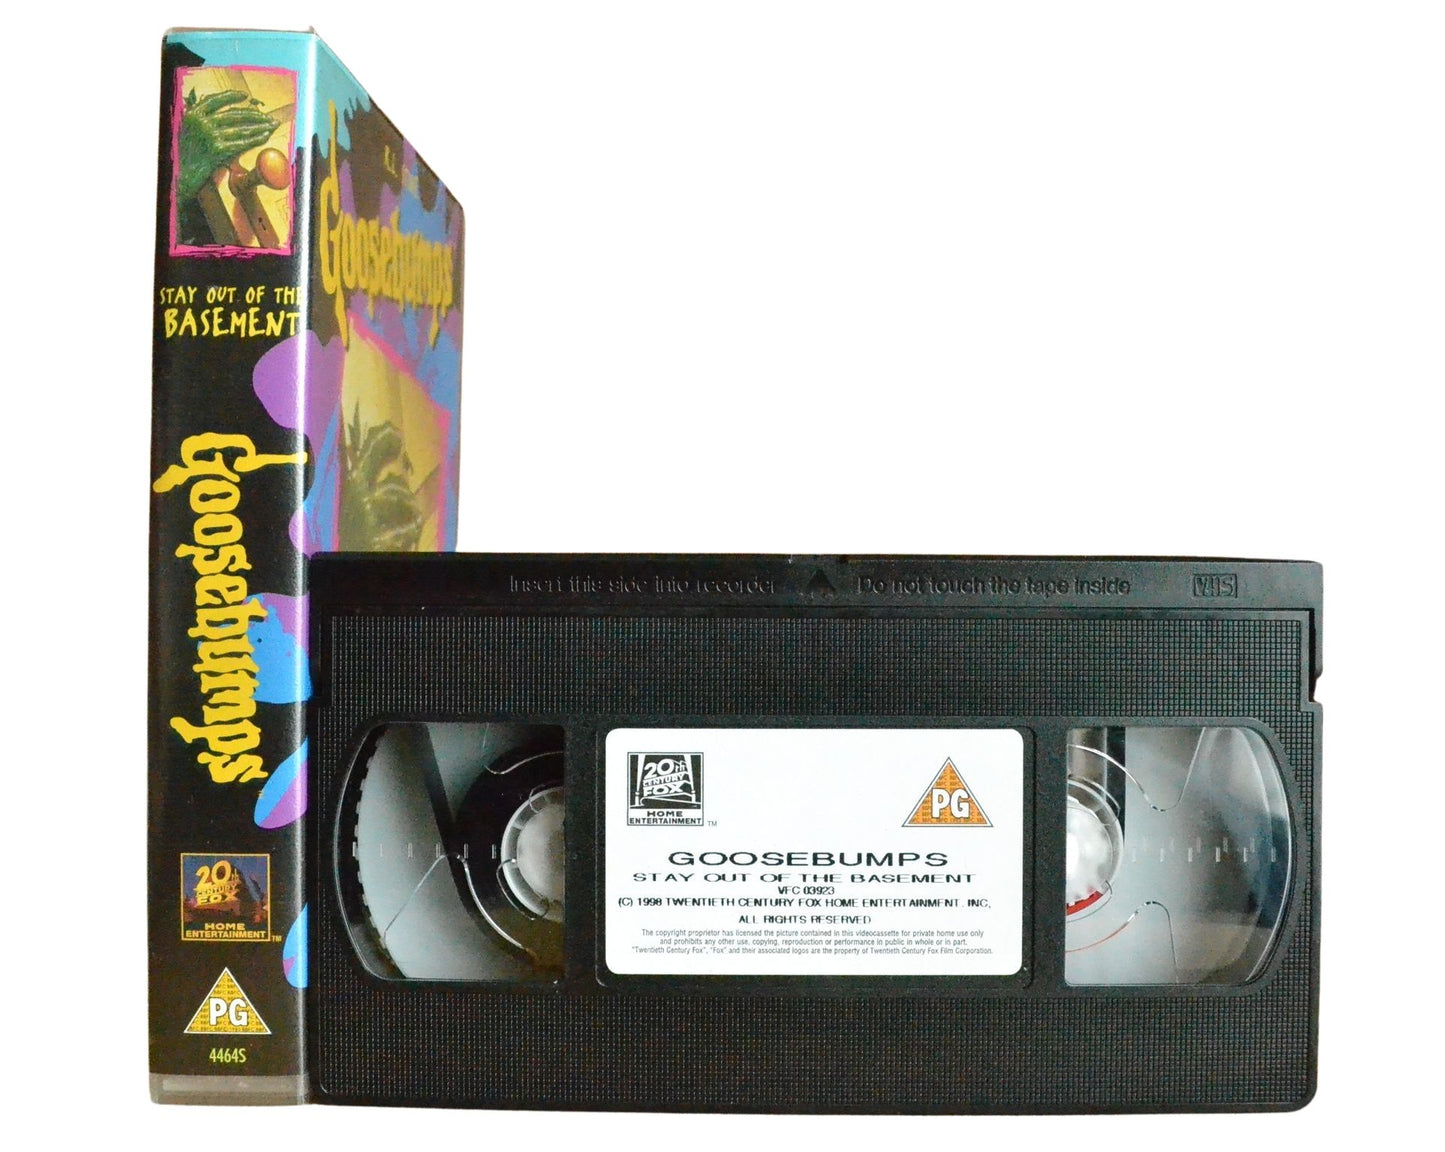 R.L. Stine Goosebumps: Stay Out of the Basement - Children’s - Pal VHS-